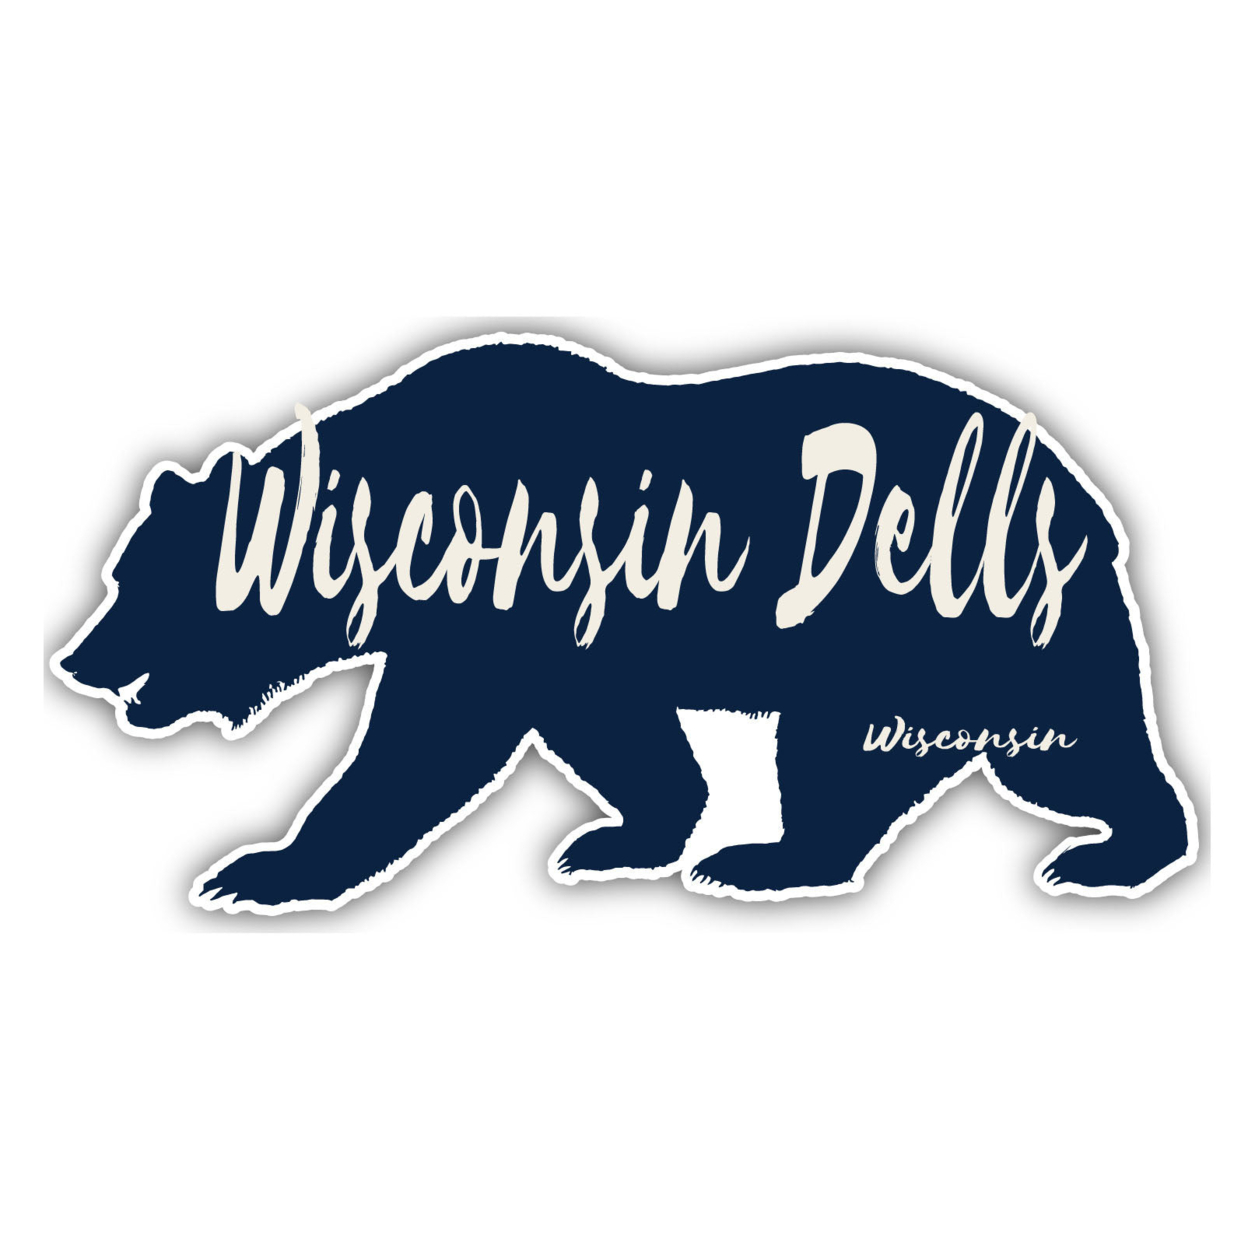 Wisconsin Dells Wisconsin Souvenir Decorative Stickers (Choose Theme And Size) - Single Unit, 4-Inch, Bear